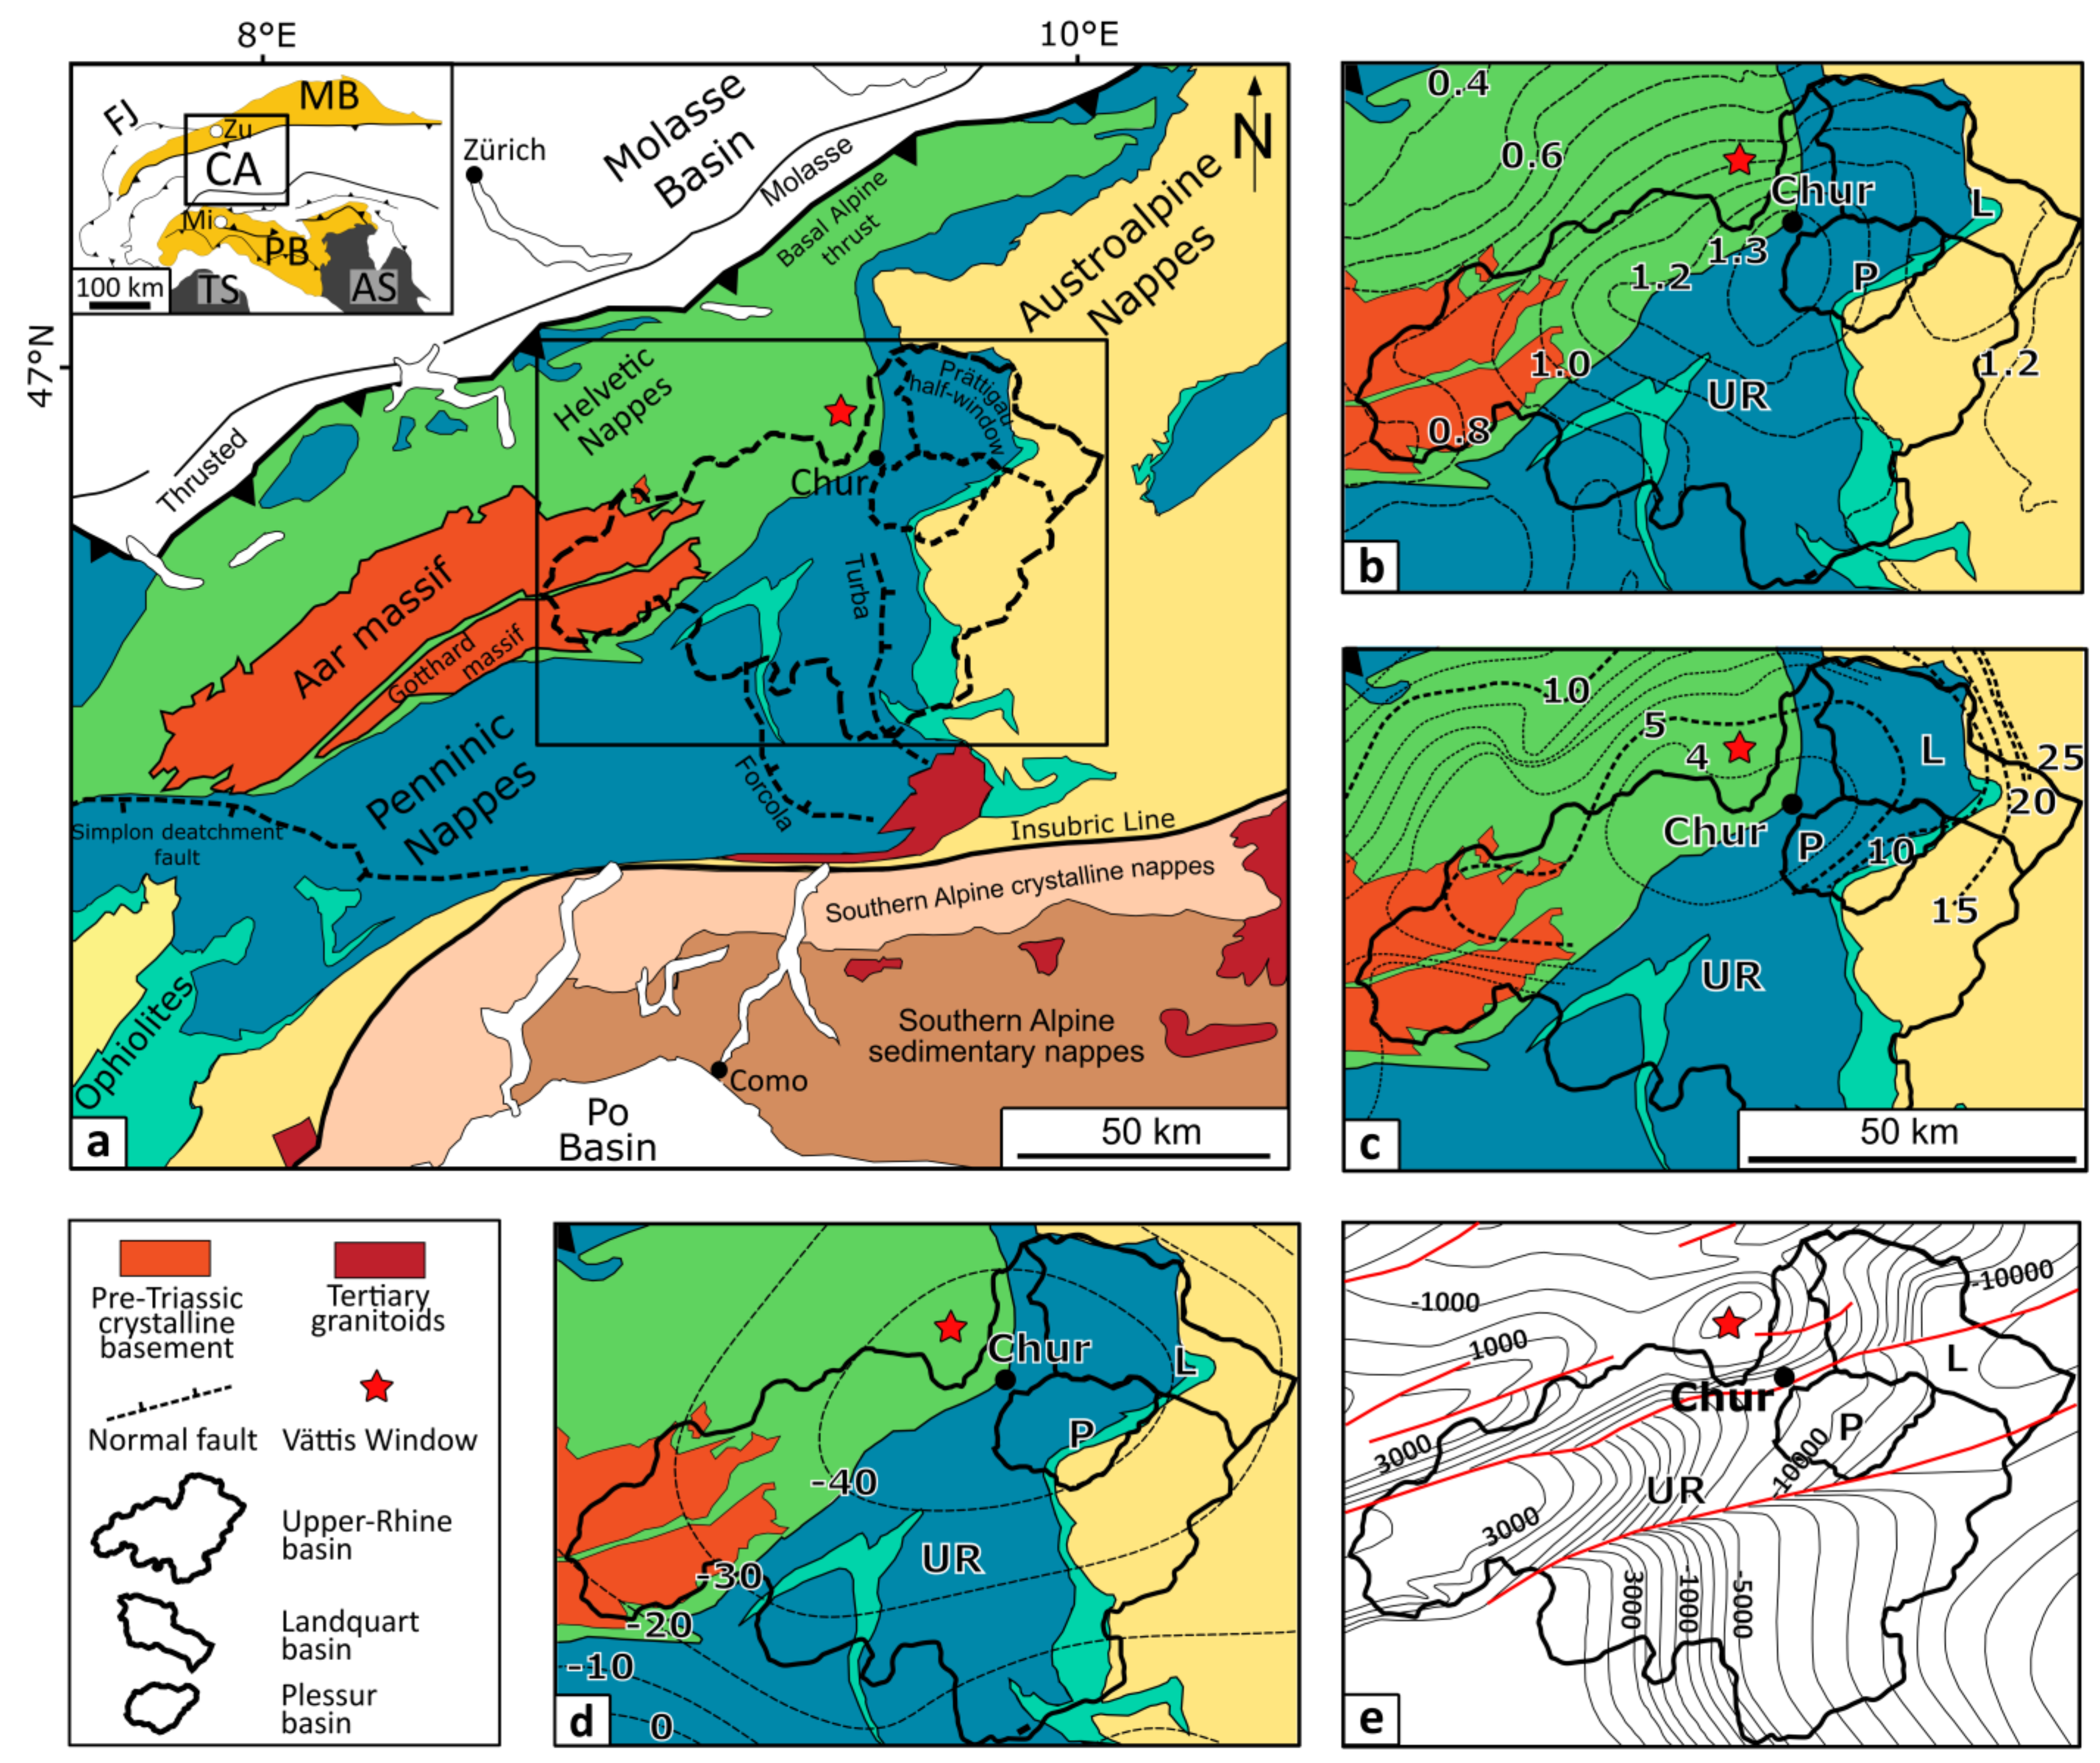 Geosciences | Free Full-Text | Cosmogenic and Geological Evidence for the  Occurrence of a Ma-Long Feedback between Uplift and Denudation, Chur  Region, Swiss Alps